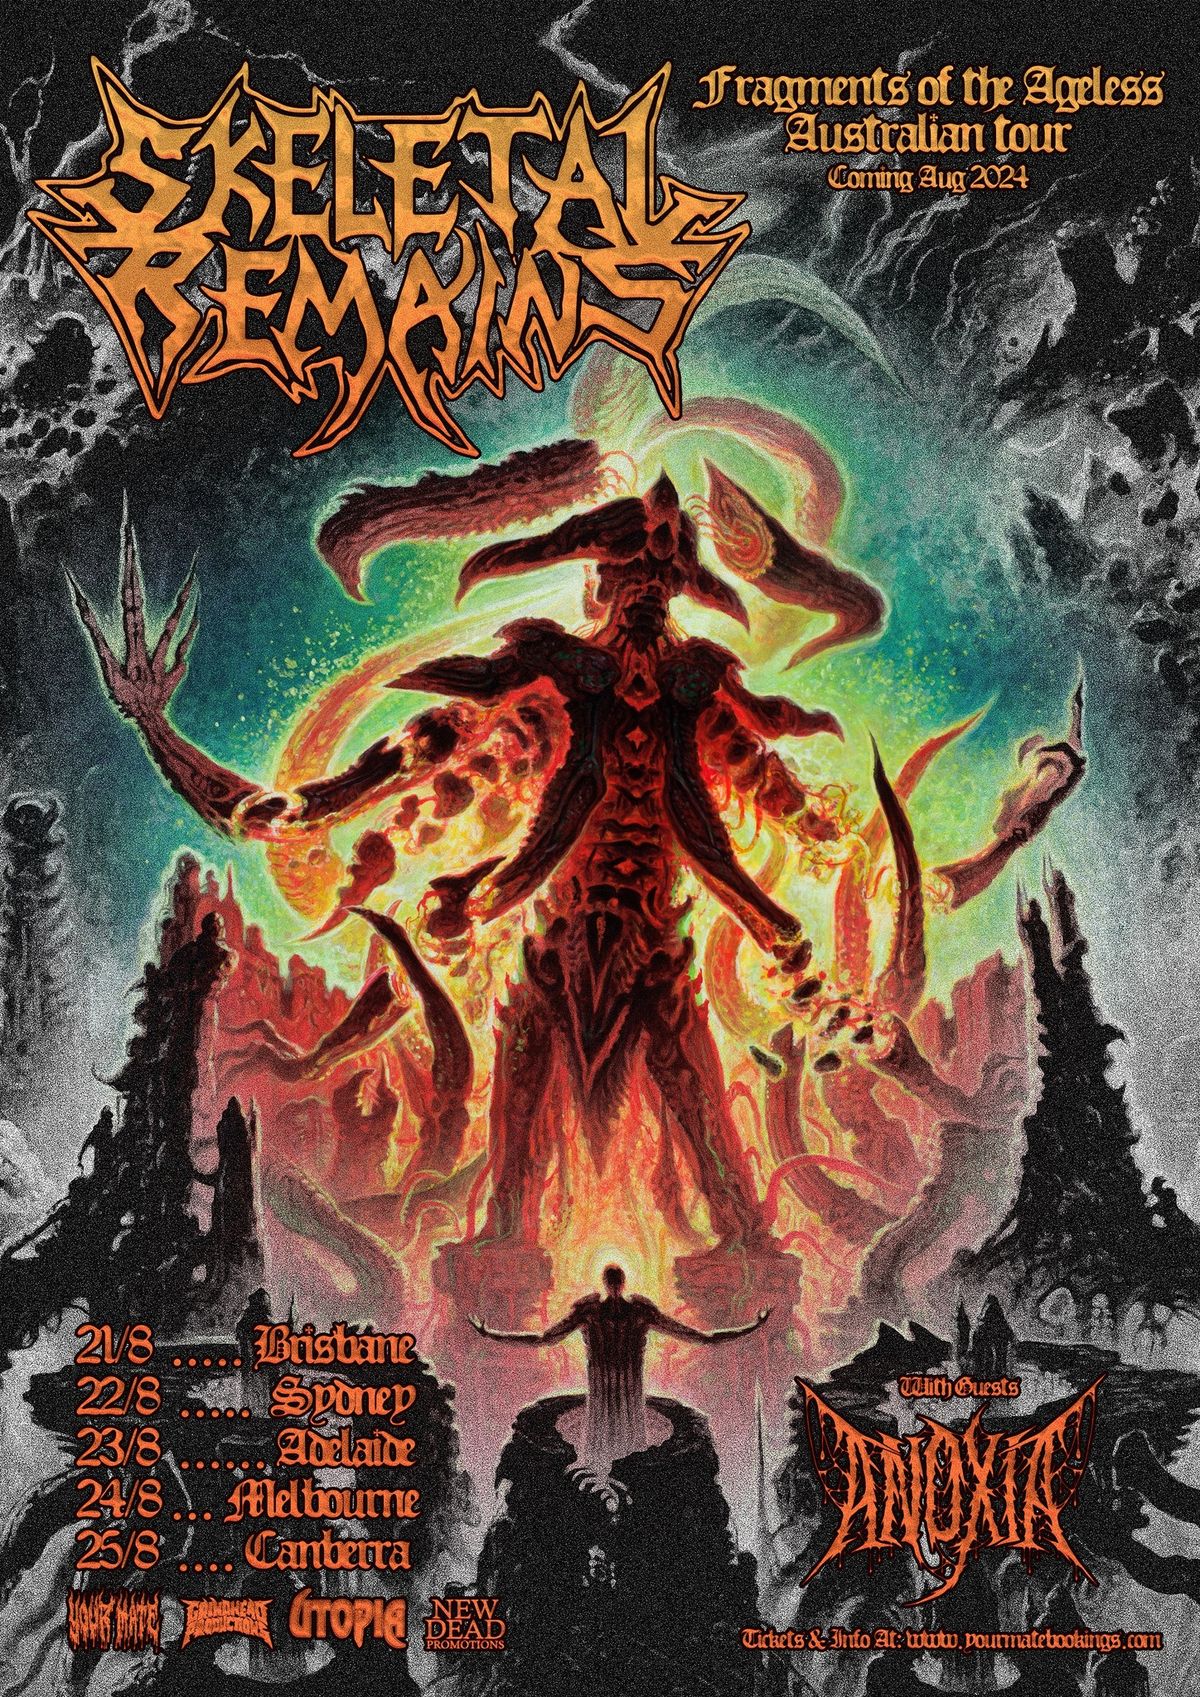 Skeletal Remains (USA) Adelaide with Anoxia & Guests